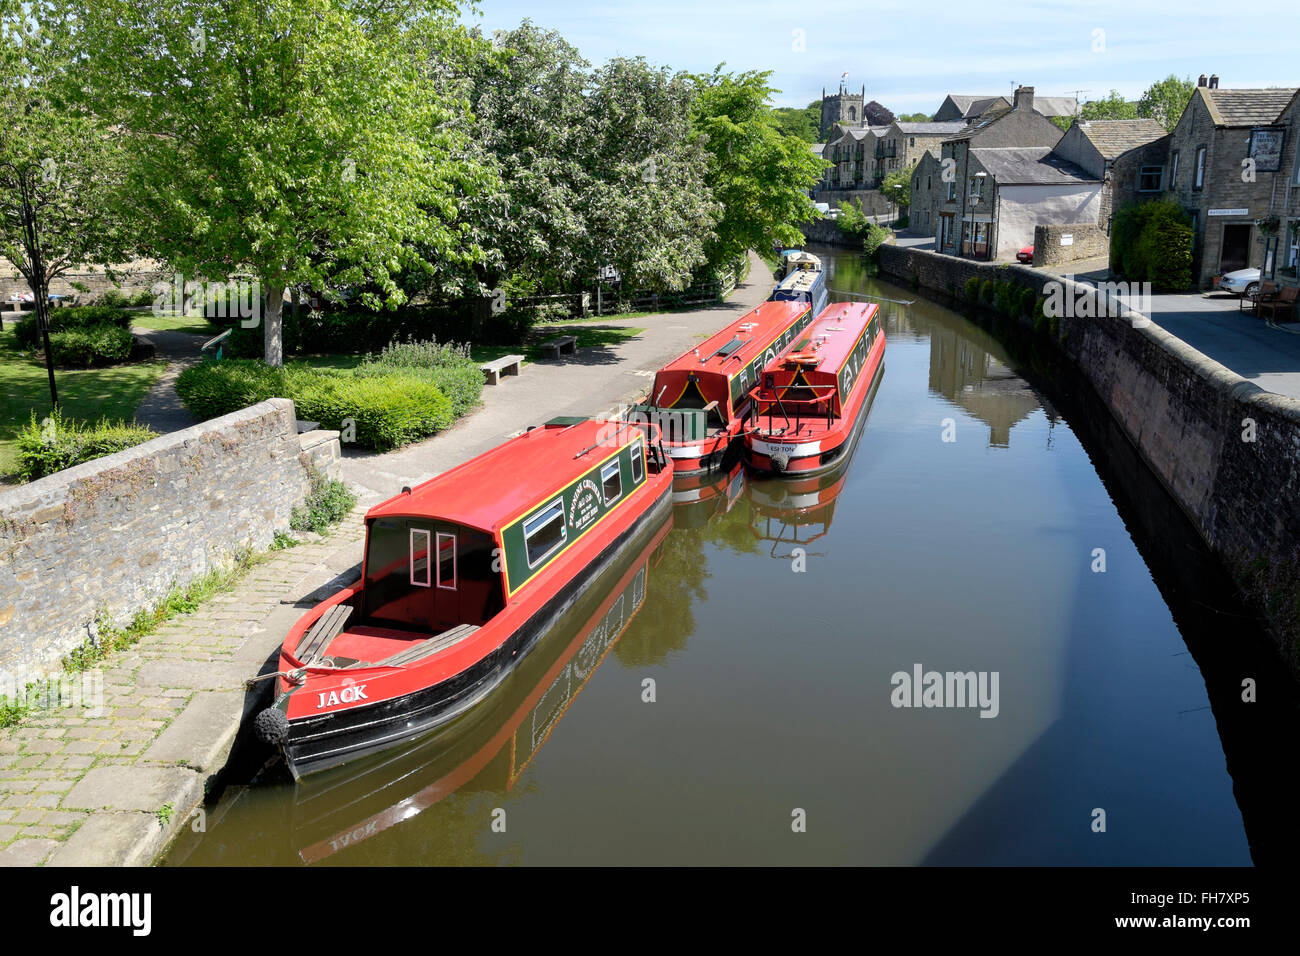 Narrowboats moored on the Leeds-Liverpool canal, Skipton, Yorkshire, England Stock Photo